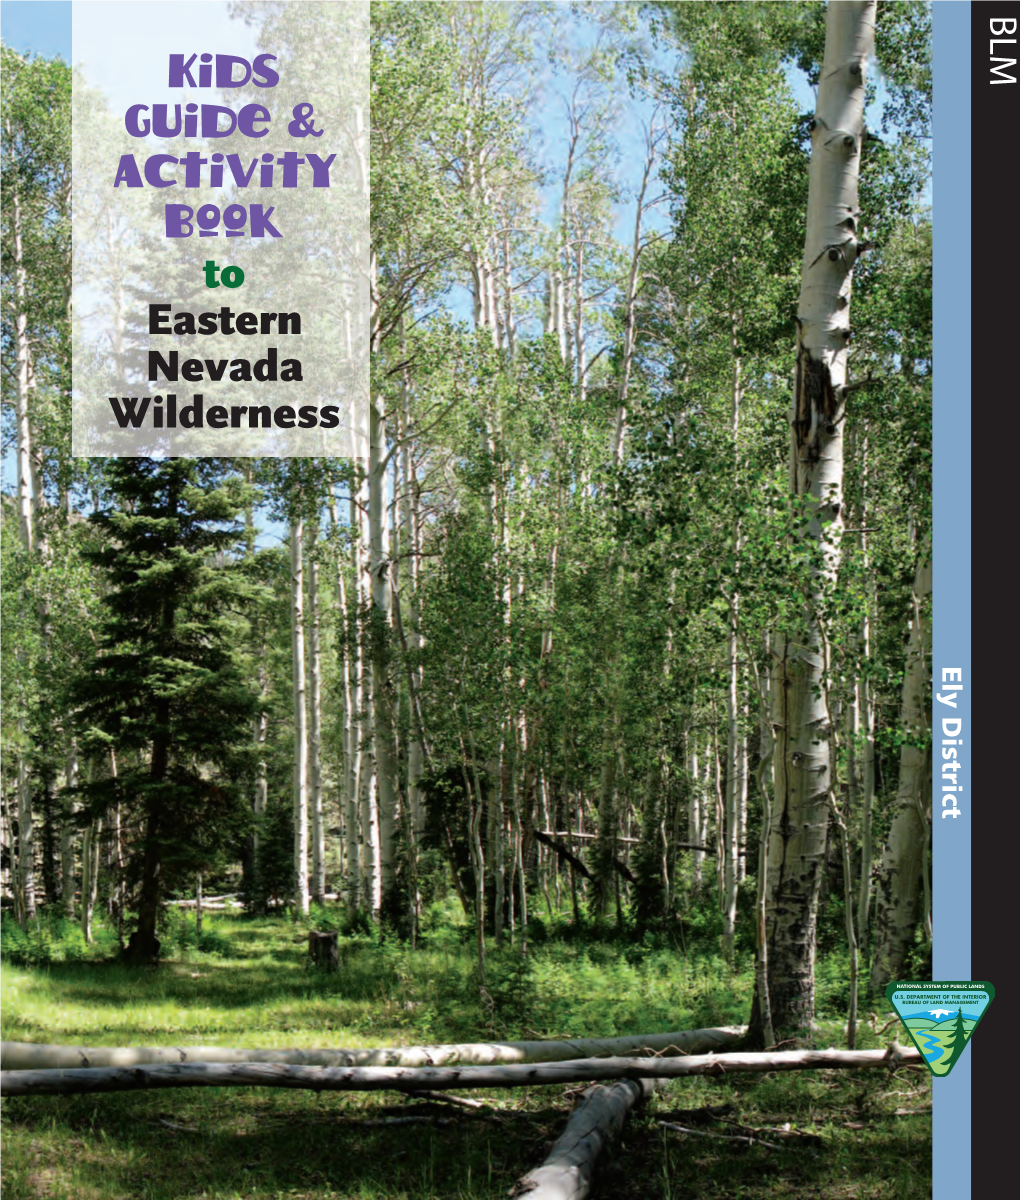 Kids Guide and Activity Book to Eastern Nevada Wilderness